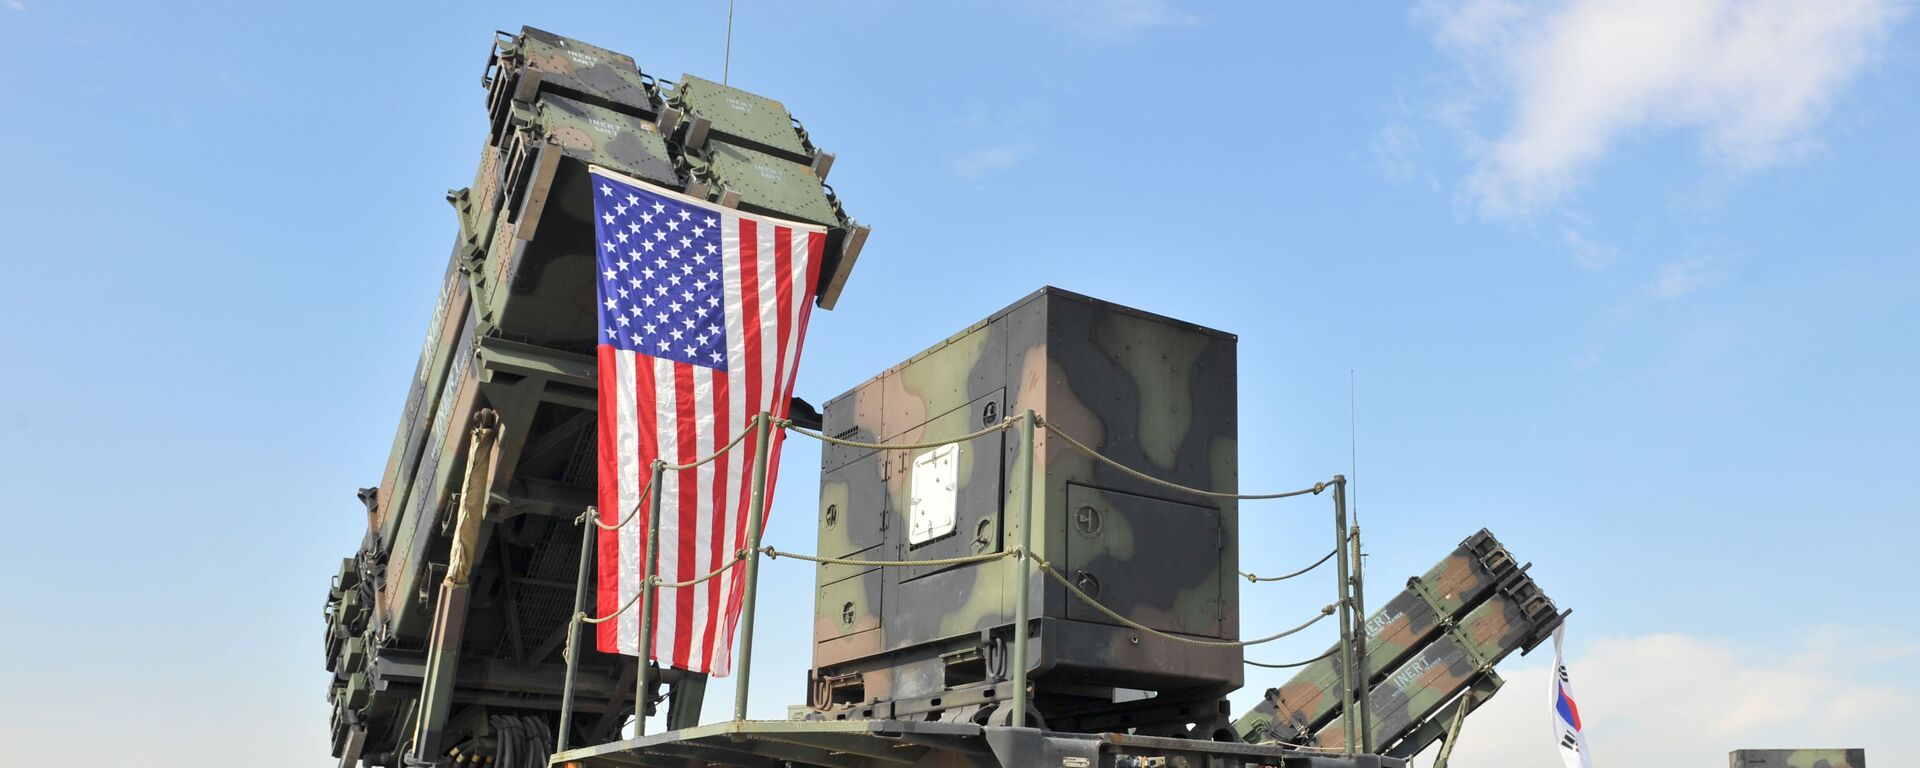 A US Army's Patriot Surface-to Air missile system is displayed during the Air Power Day at the US airbase in Osan, south of Seoul on October 12, 2008 - Sputnik International, 1920, 14.12.2022